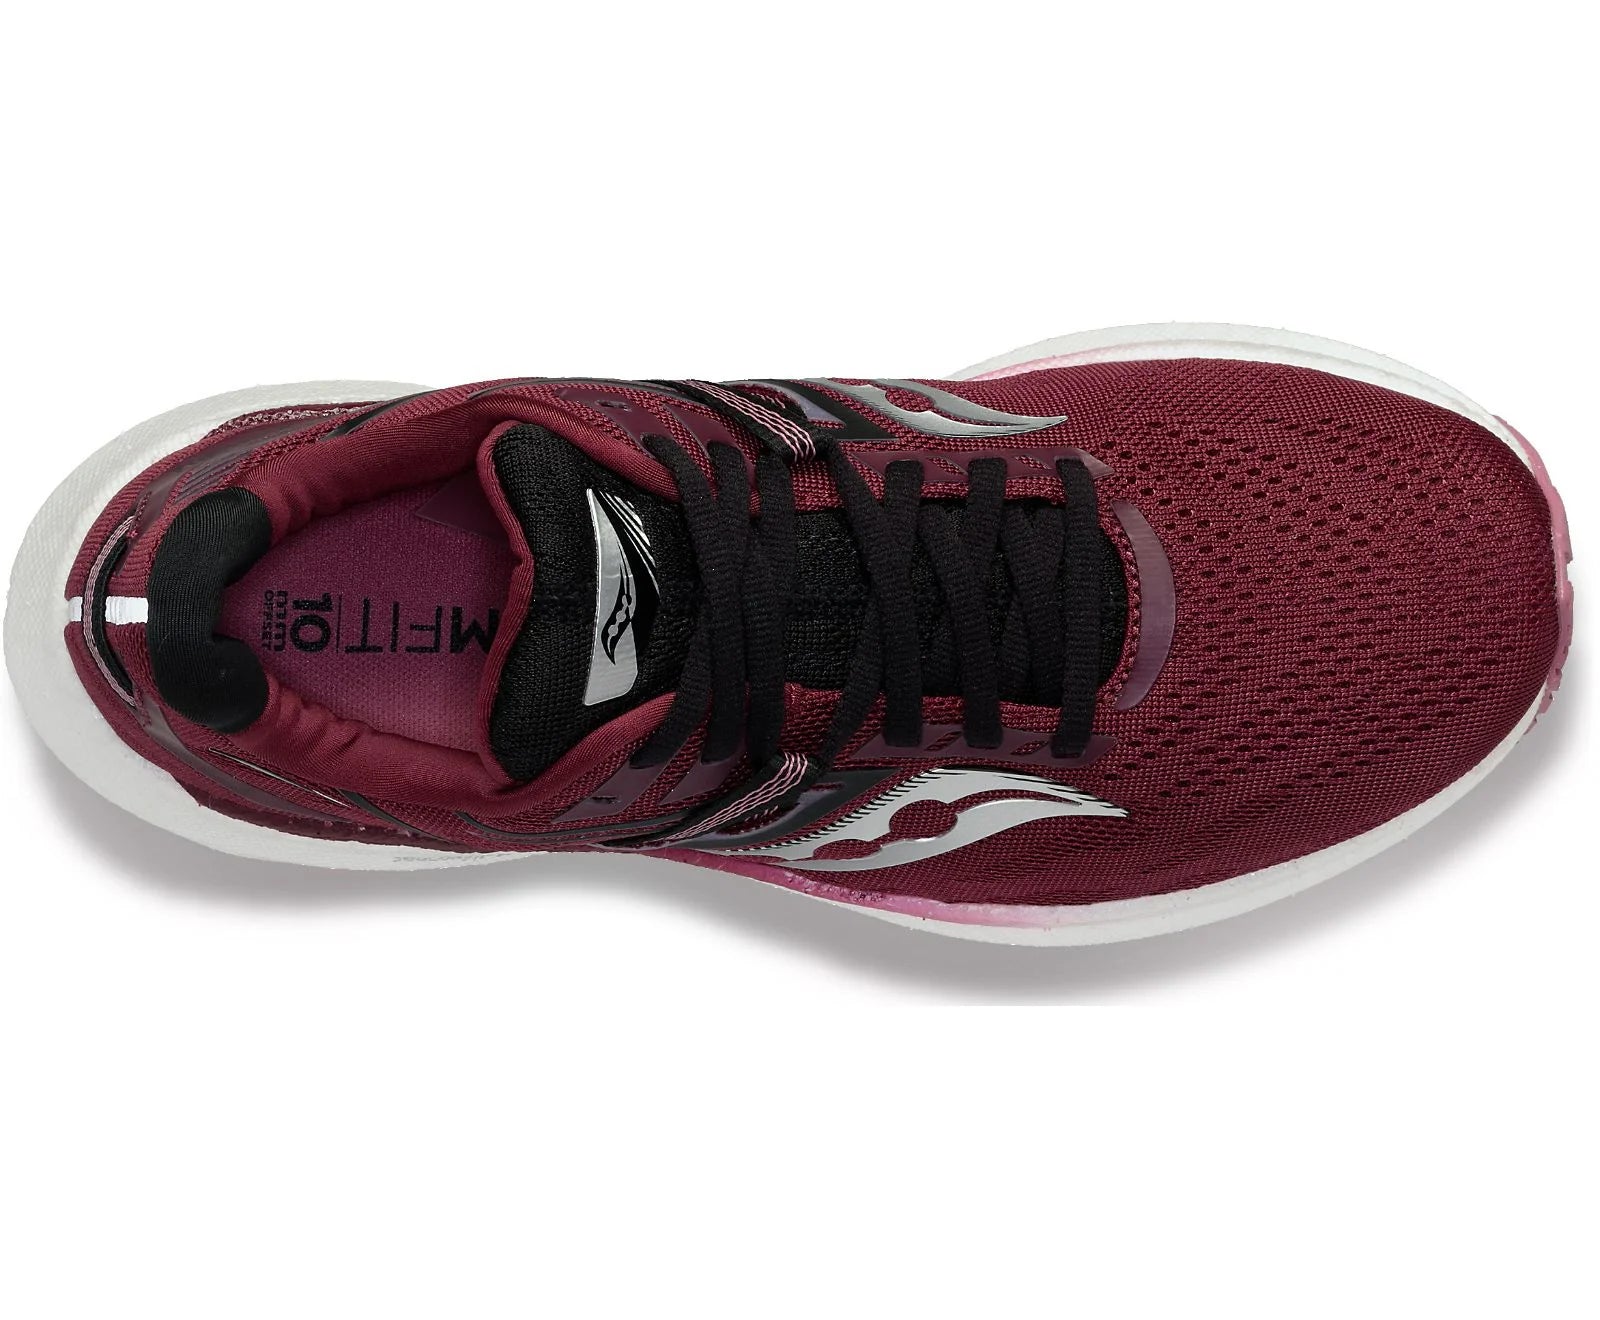 Top view of the Women's Triumph 20 by Saucony in the color Sundown / Rose